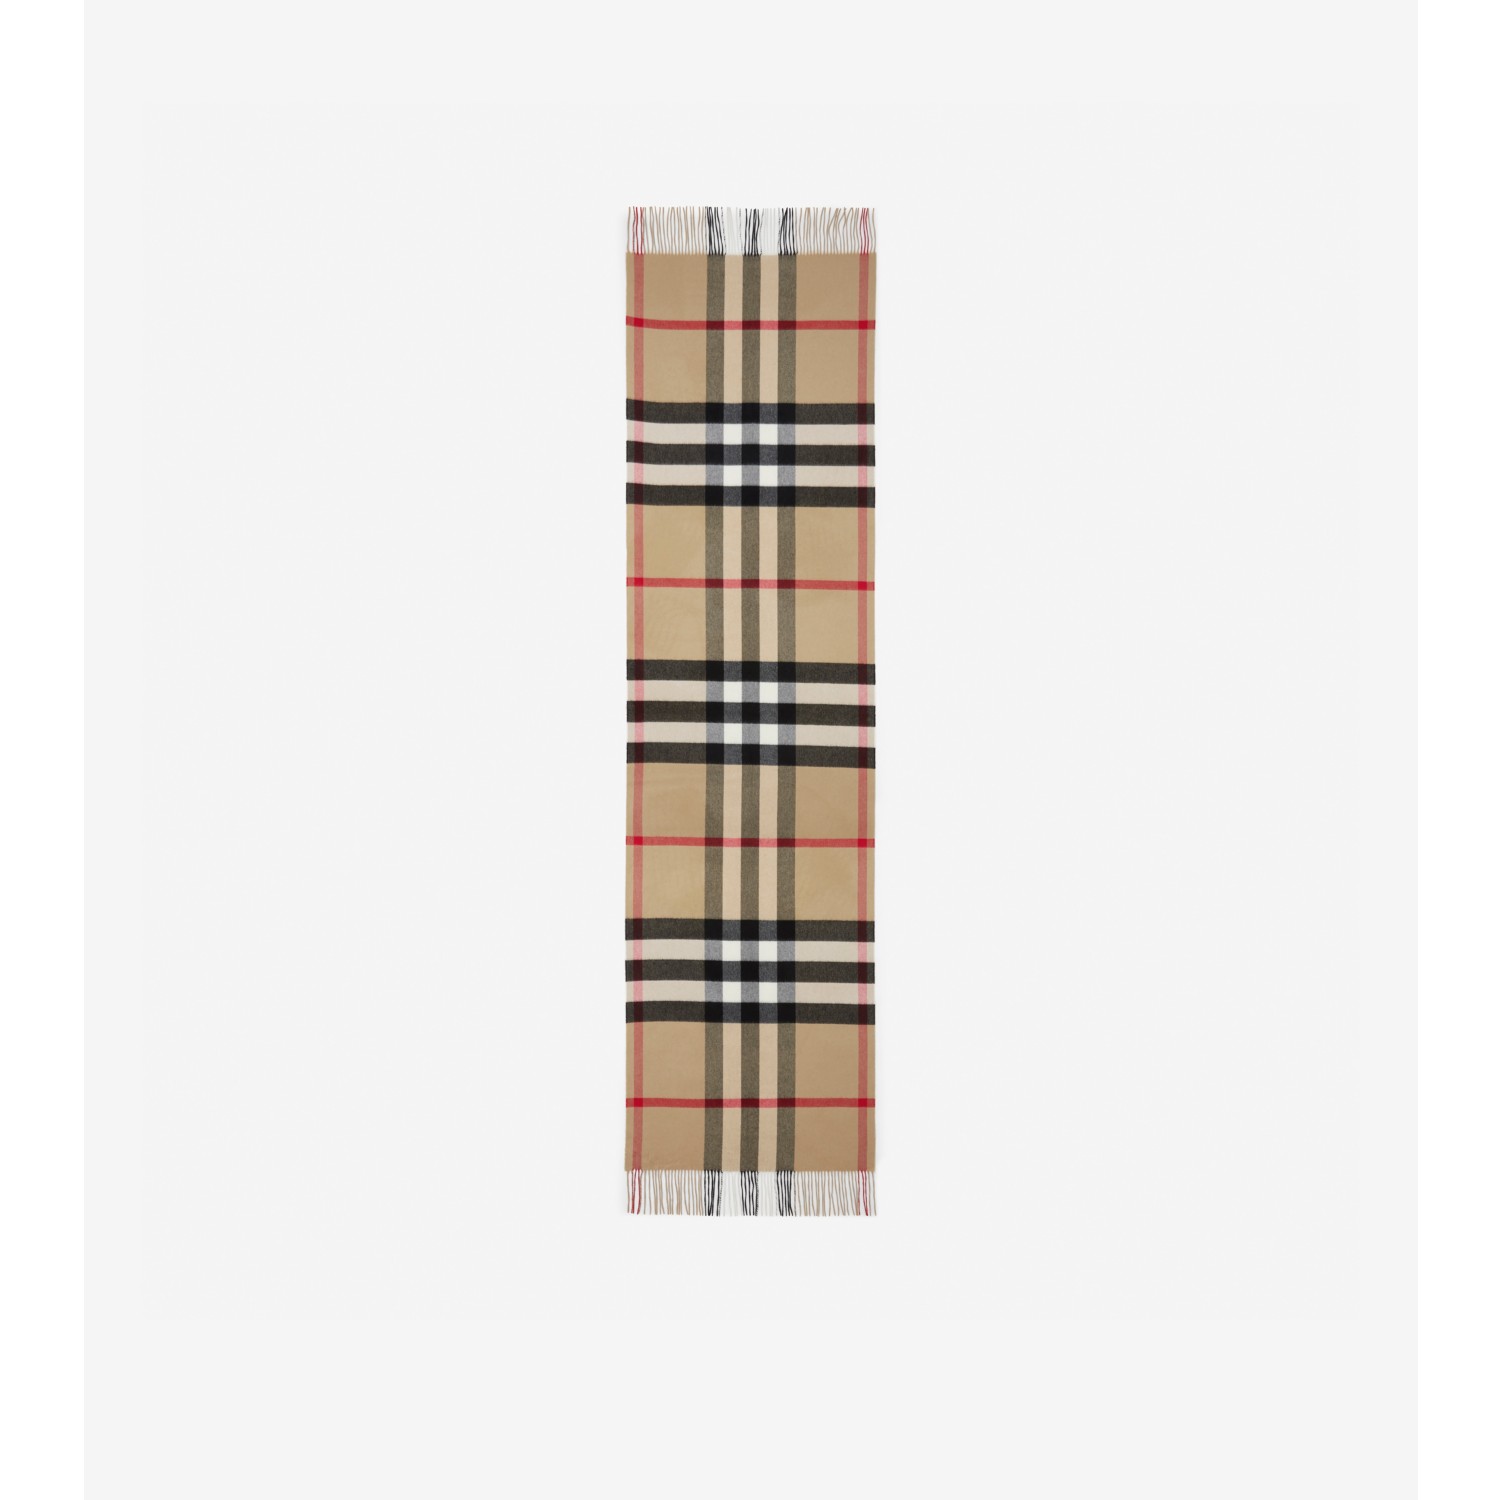 Burberry, Accessories, Burberry Check Cashmere Wrap Scarf Large 83 X 28  New